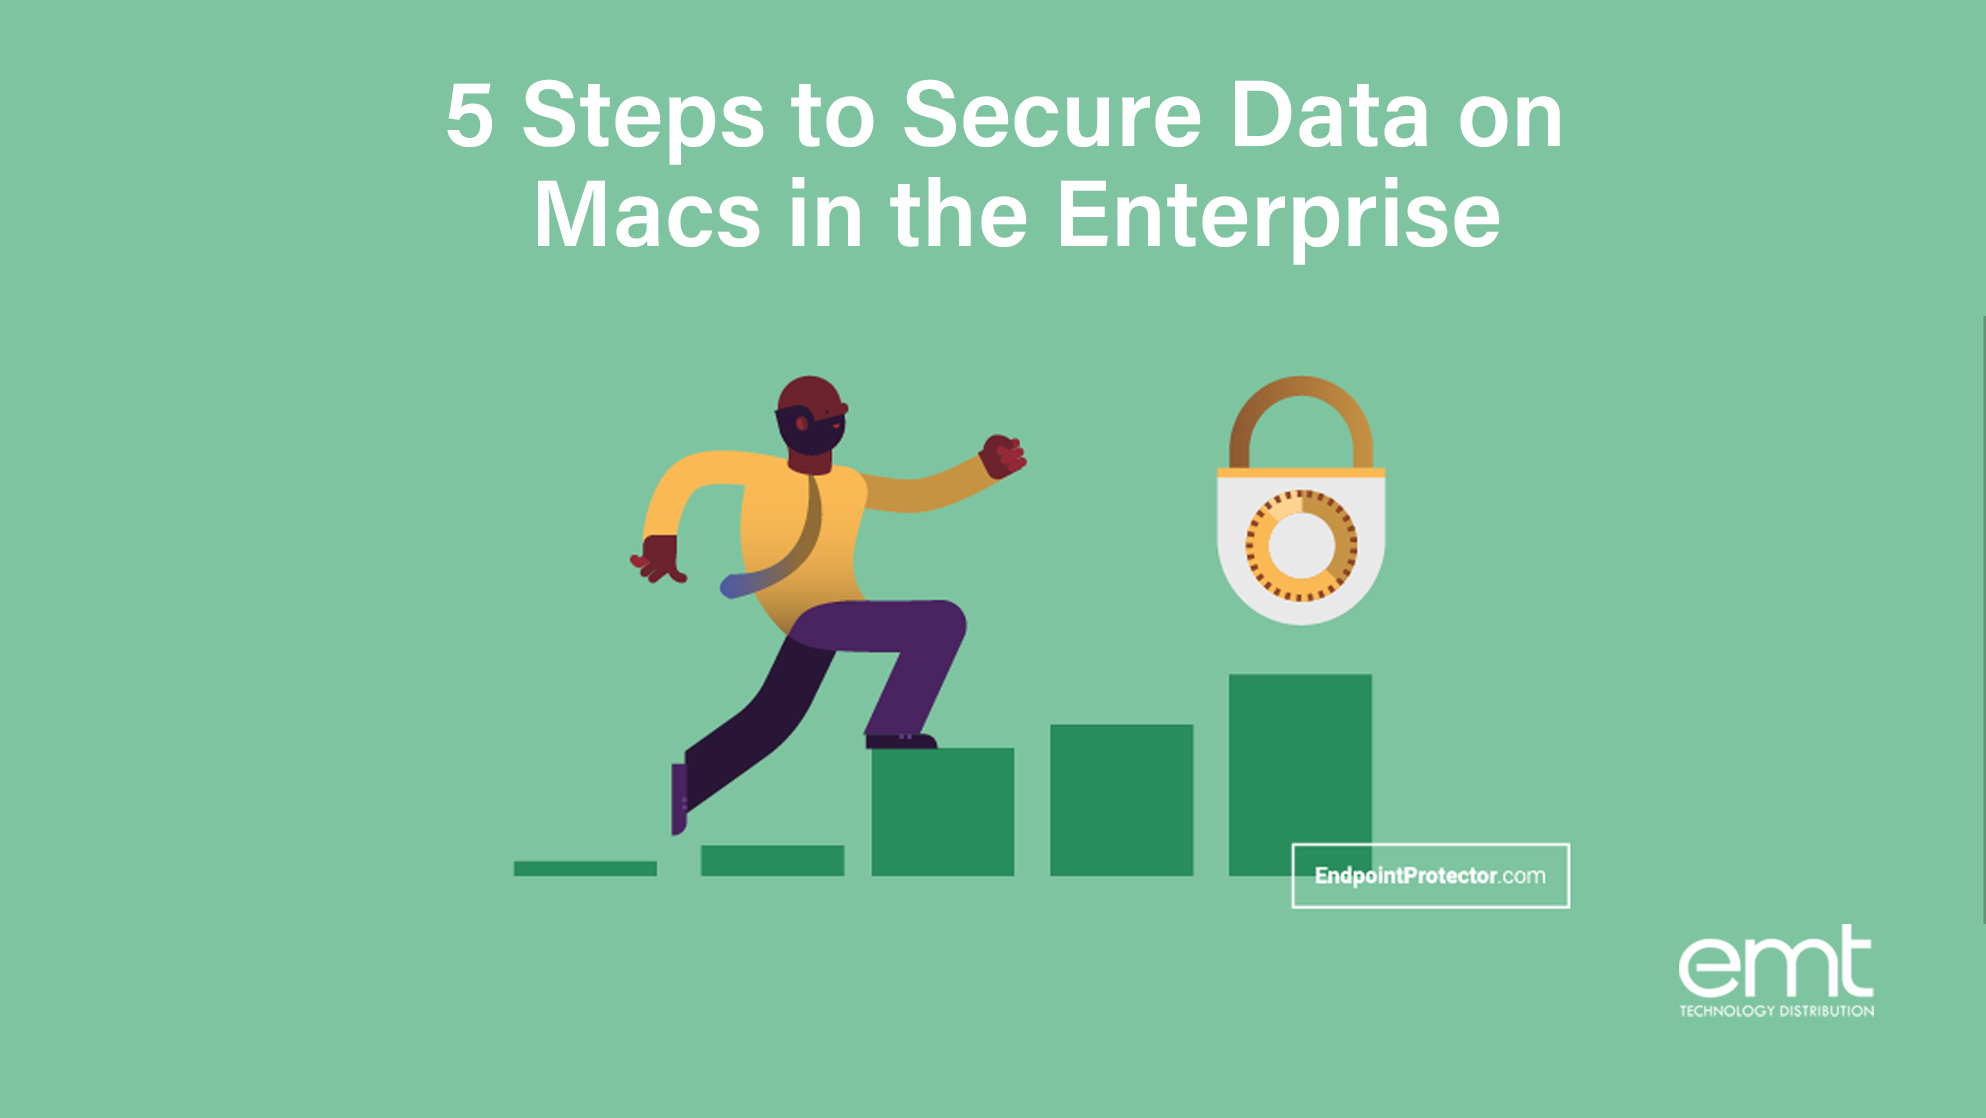 You are currently viewing 5 Steps to Secure Data on Macs in the Enterprise